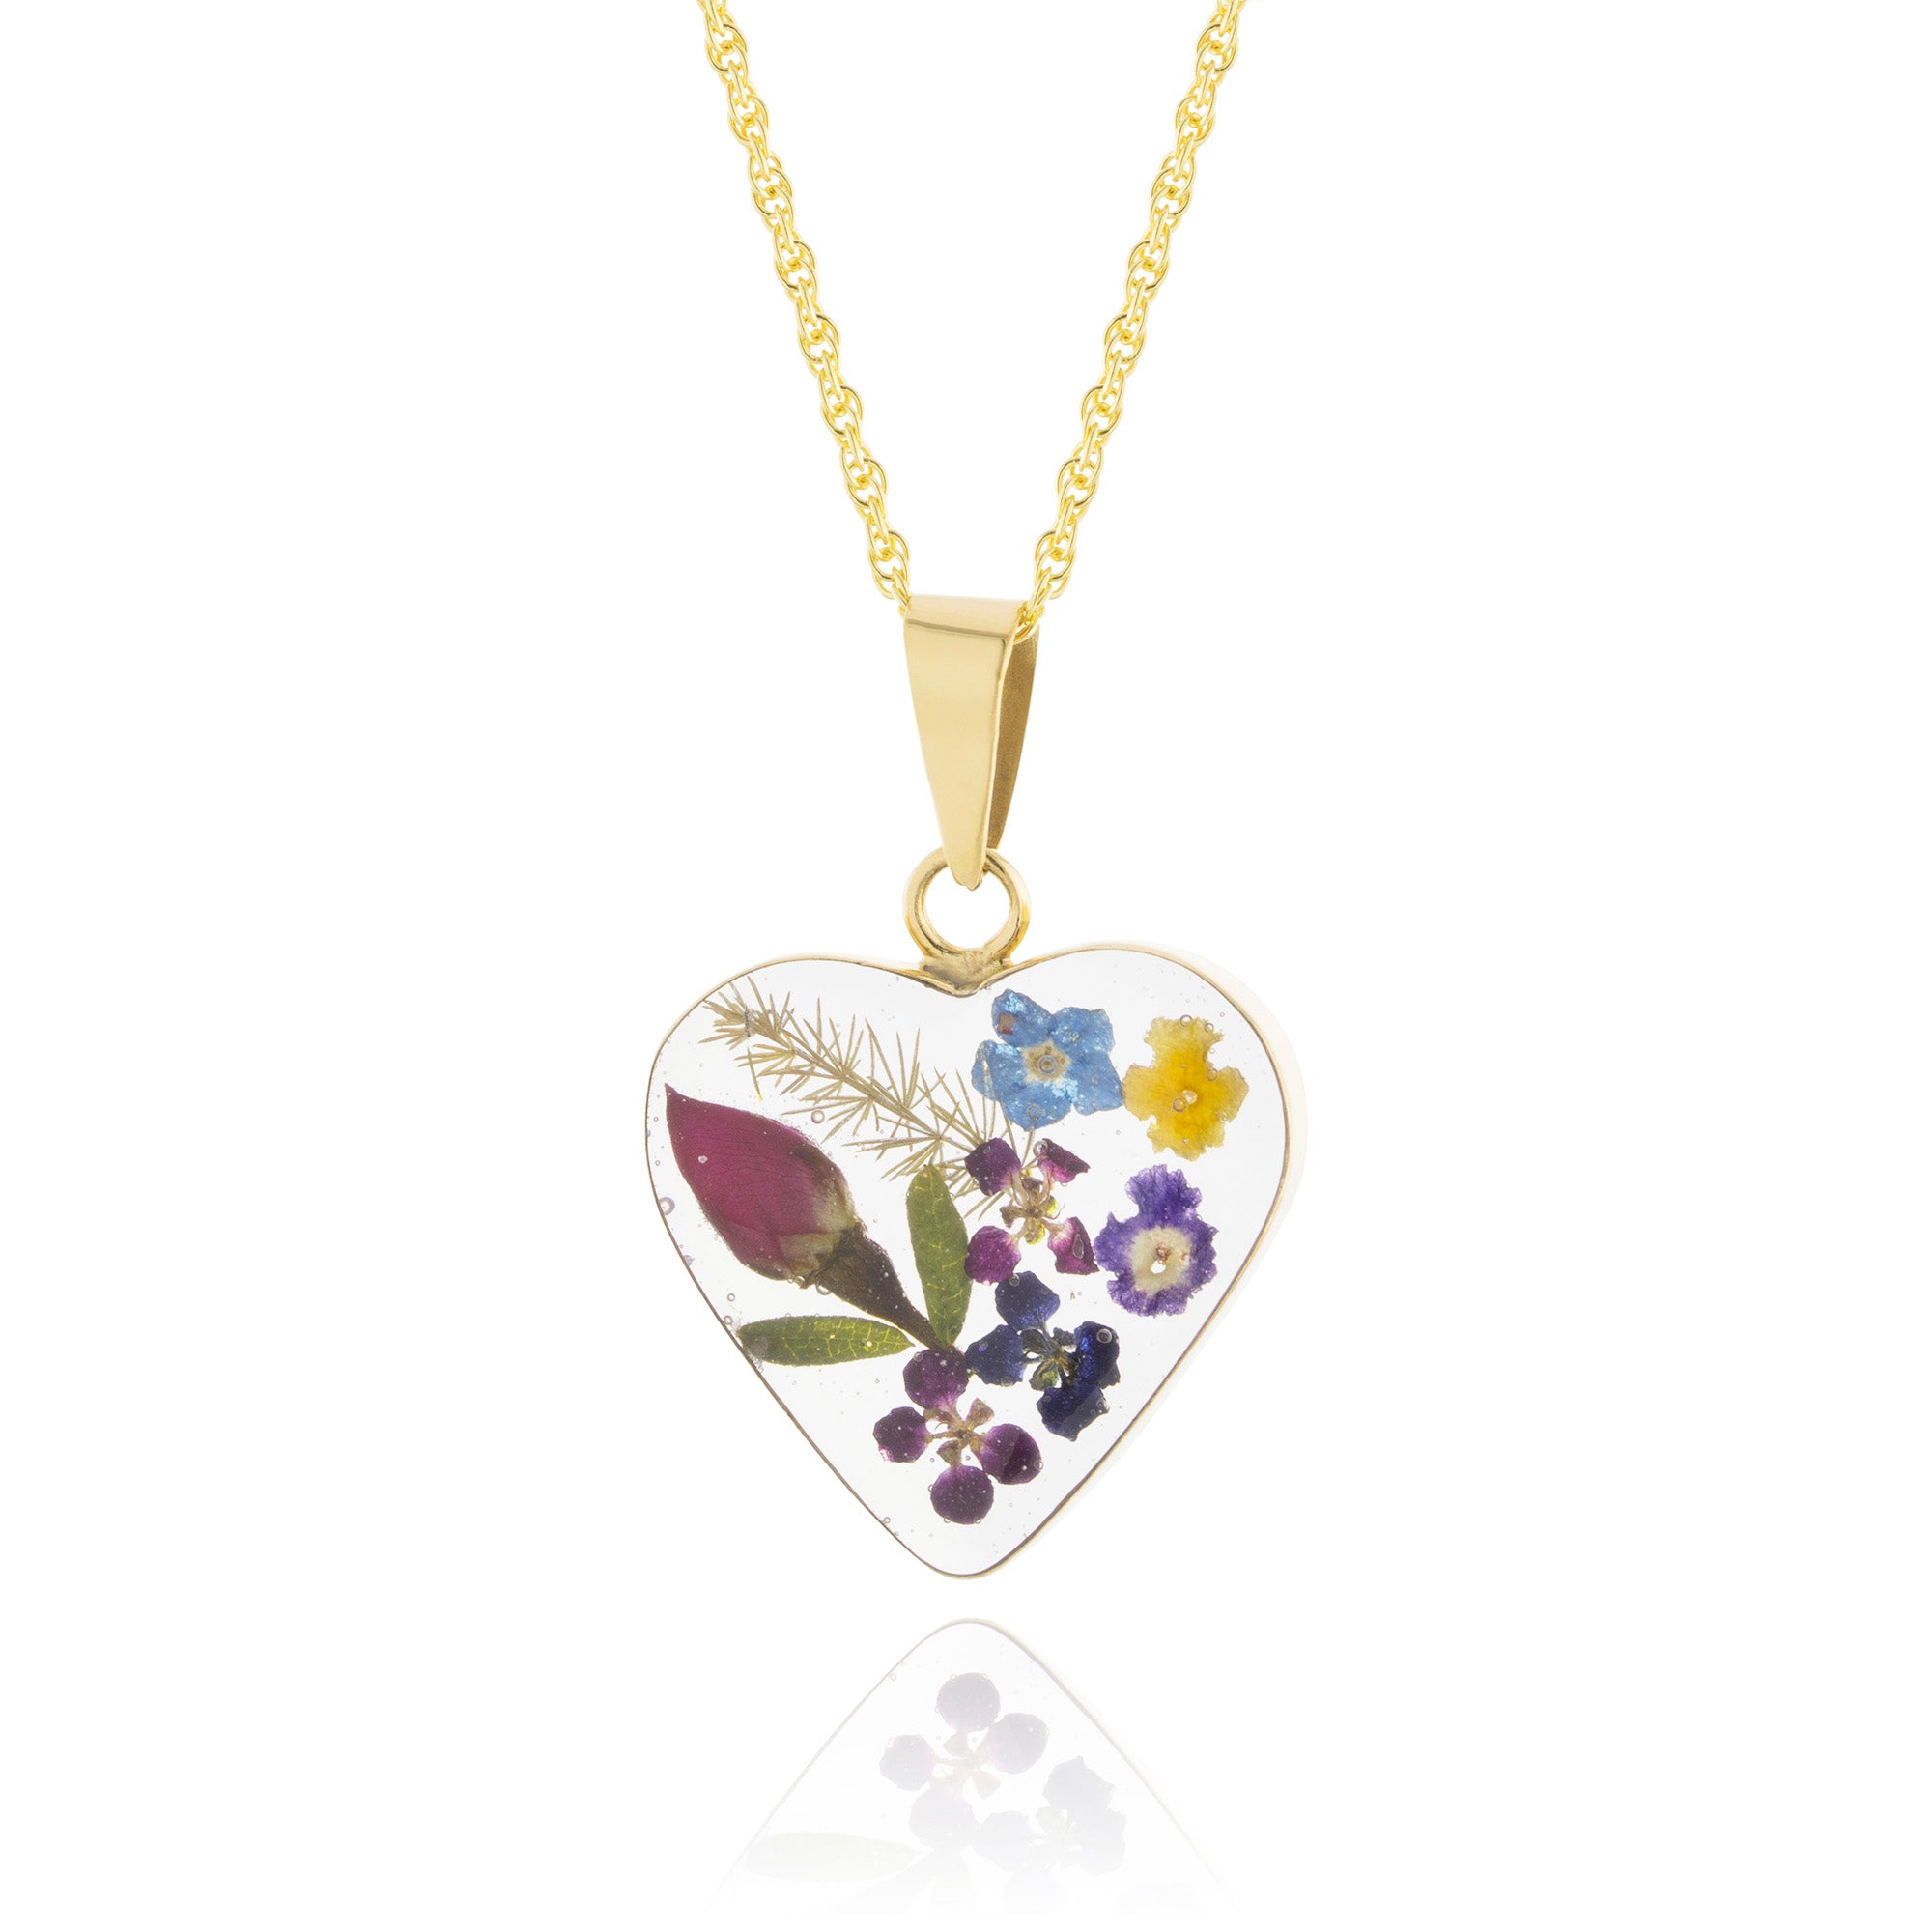 24k Gold Over Silver Pressed Flower Heart Pendant Necklace